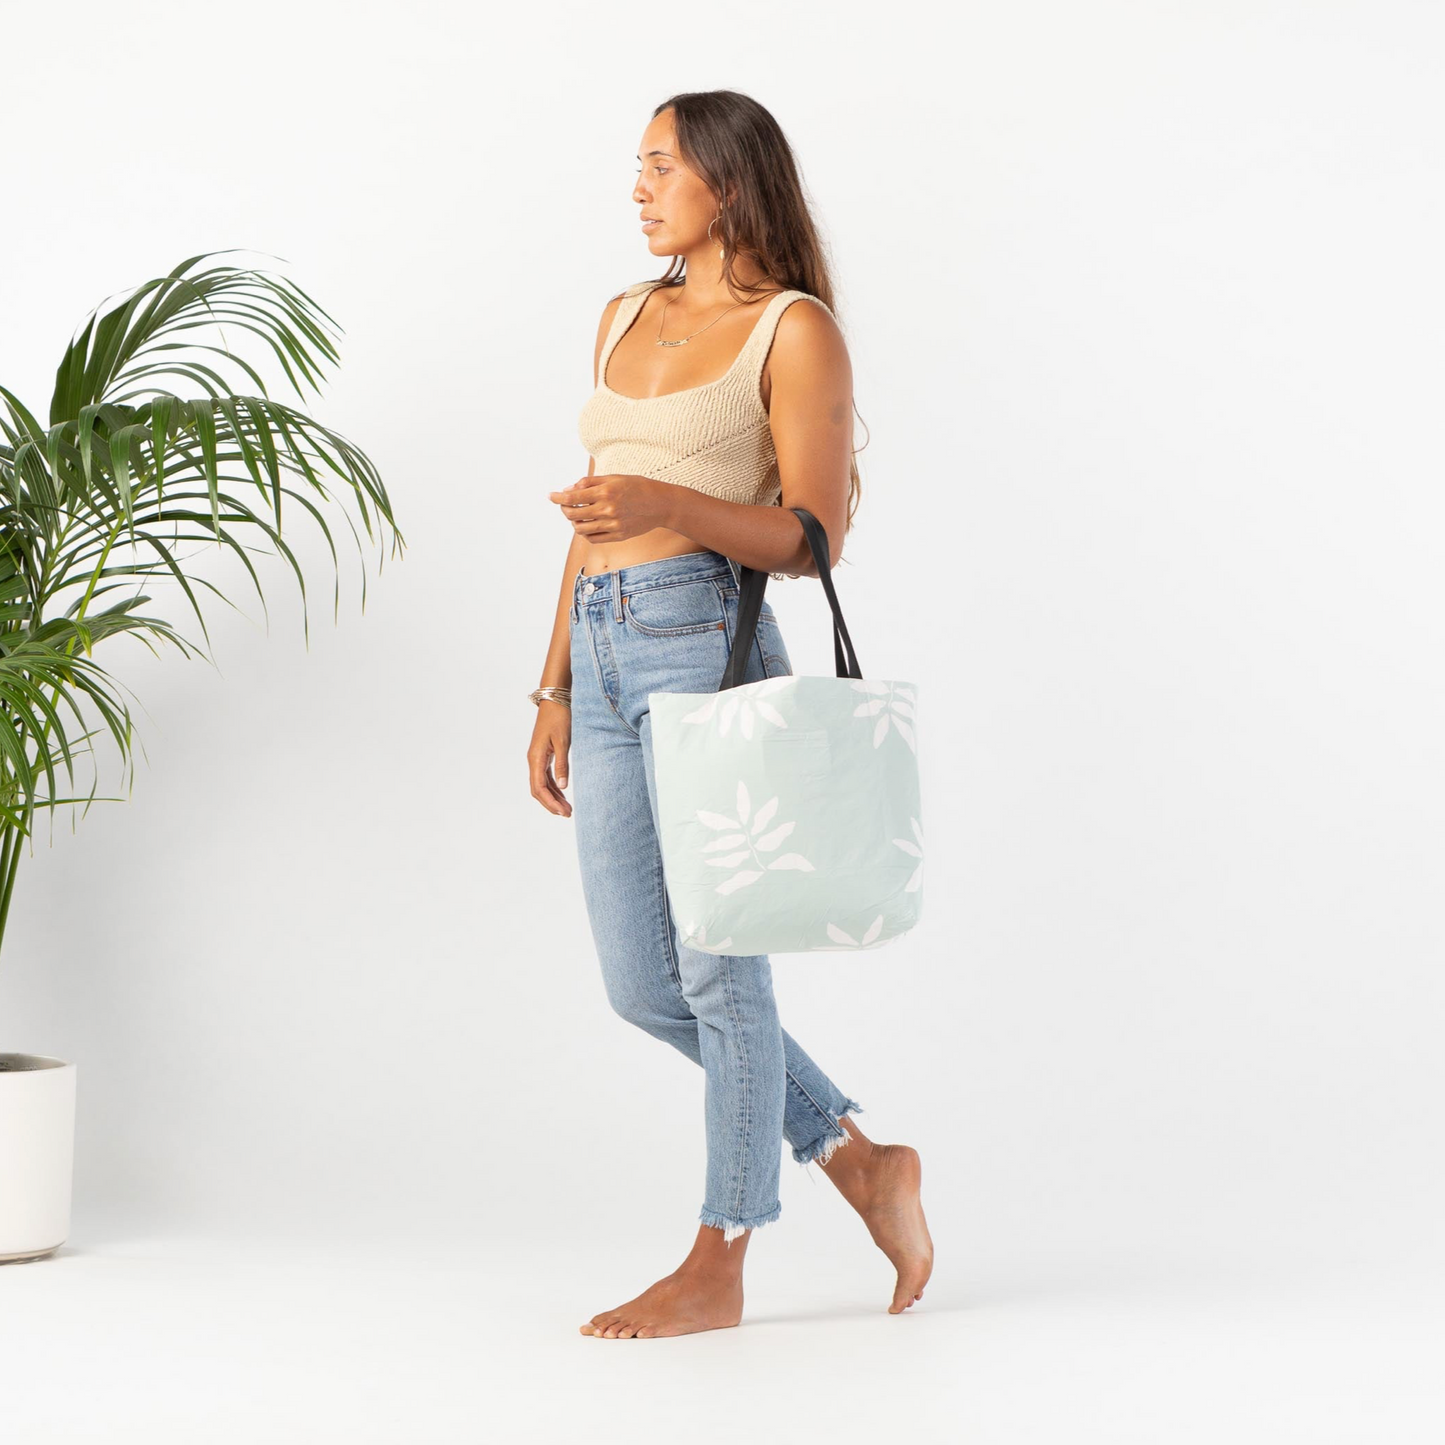 Flora in Eve - Reversible Tote